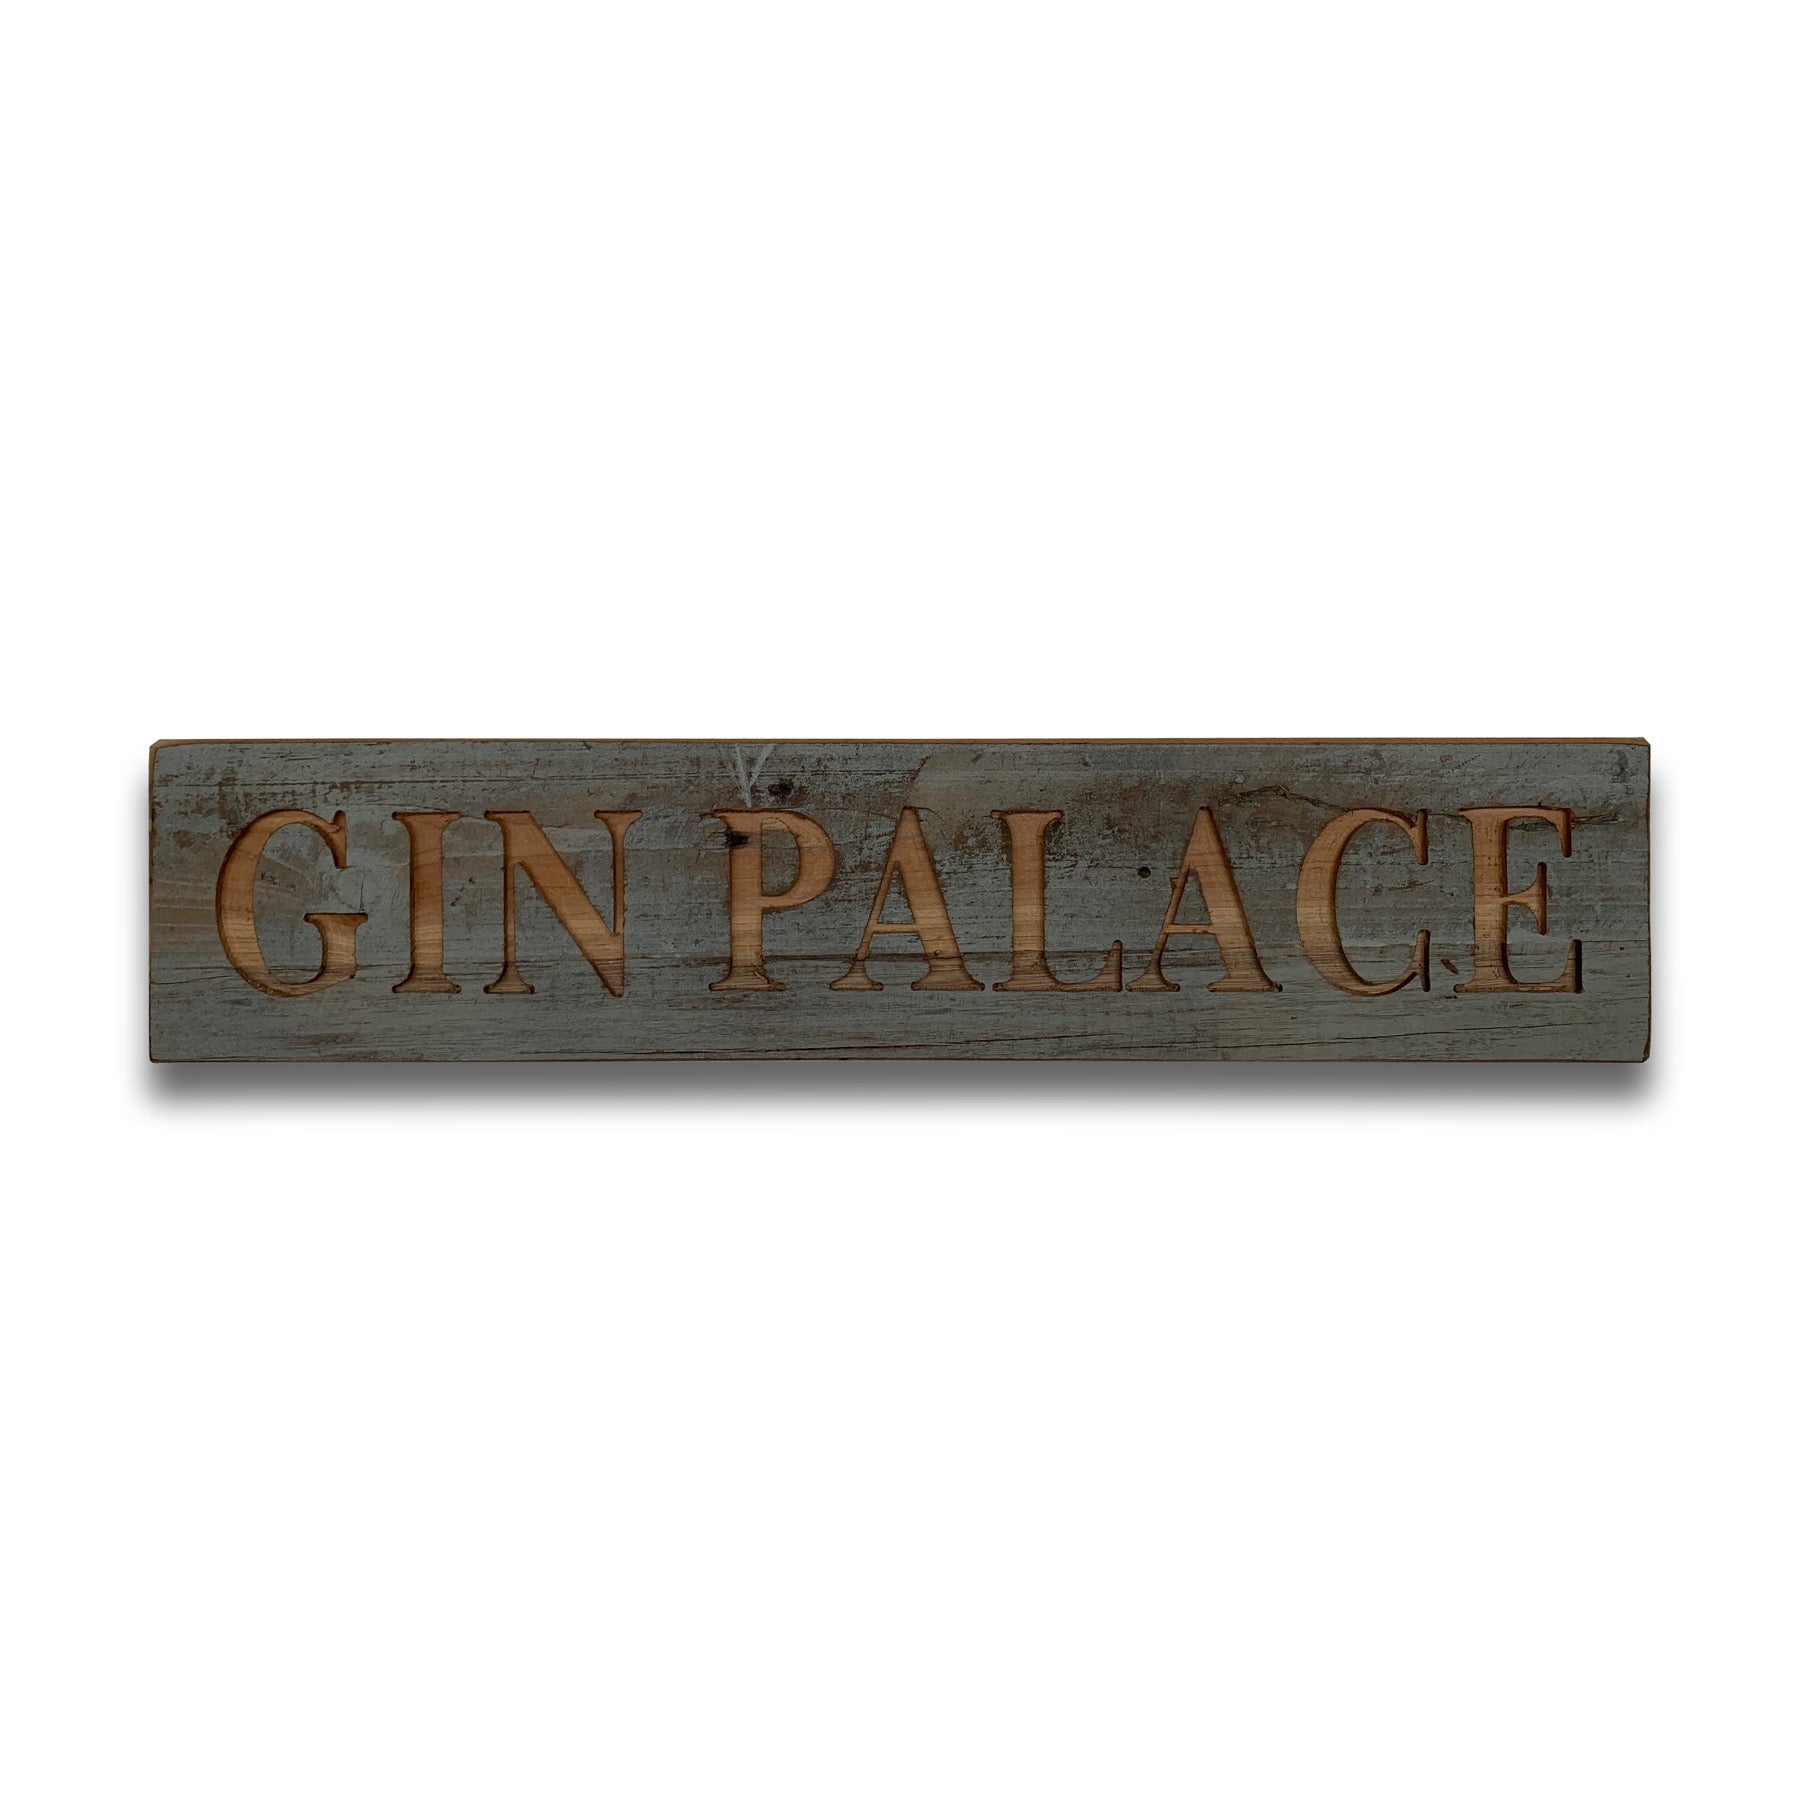 Gin Palace Grey Wash Wooden Message Plaque